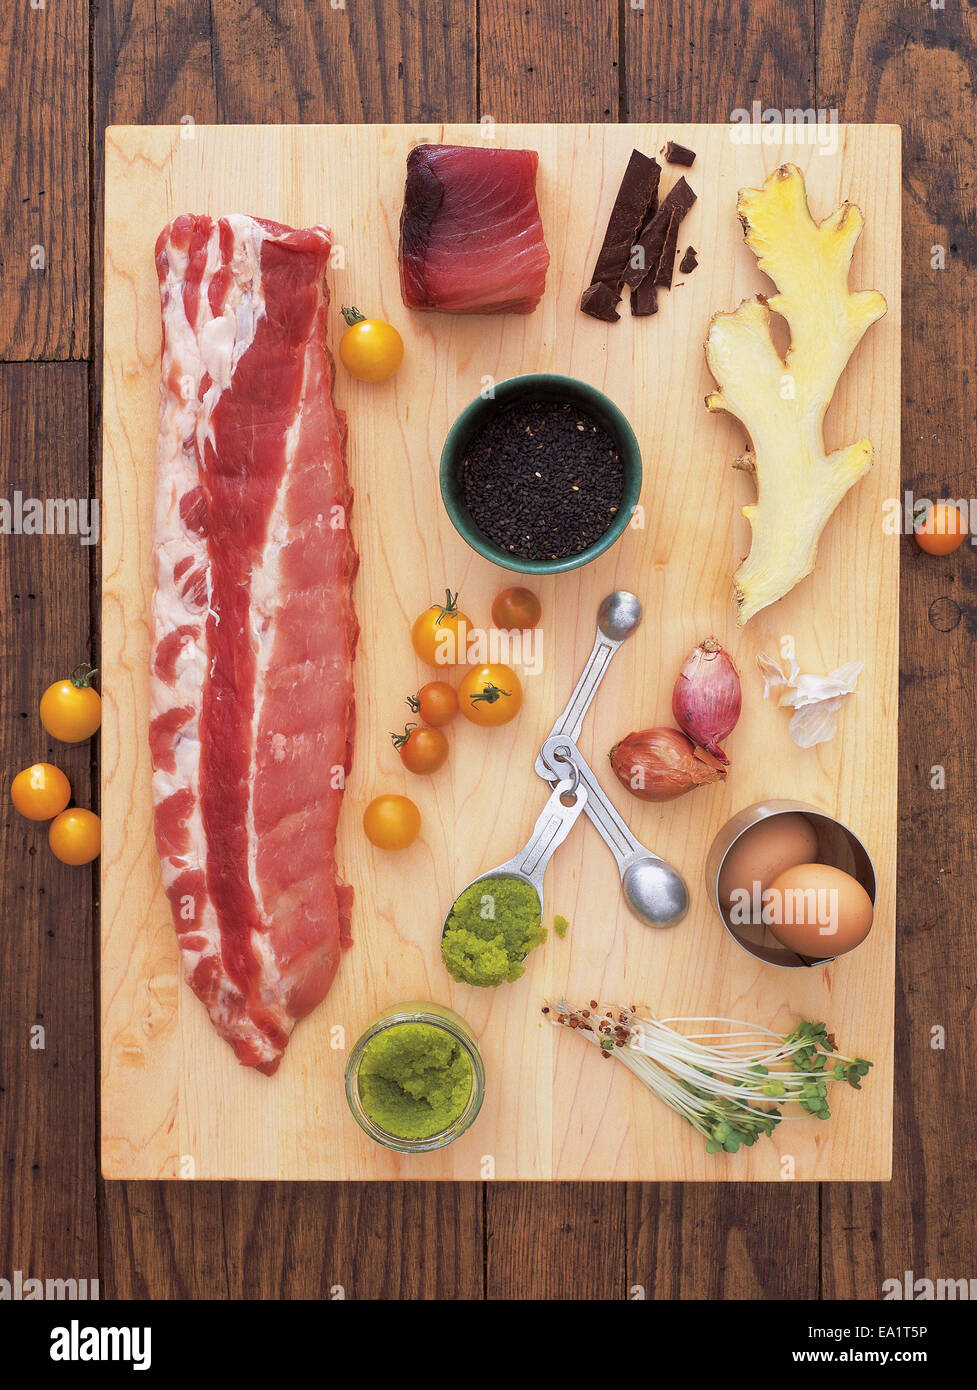 ingredients on cutting board Stock Photo